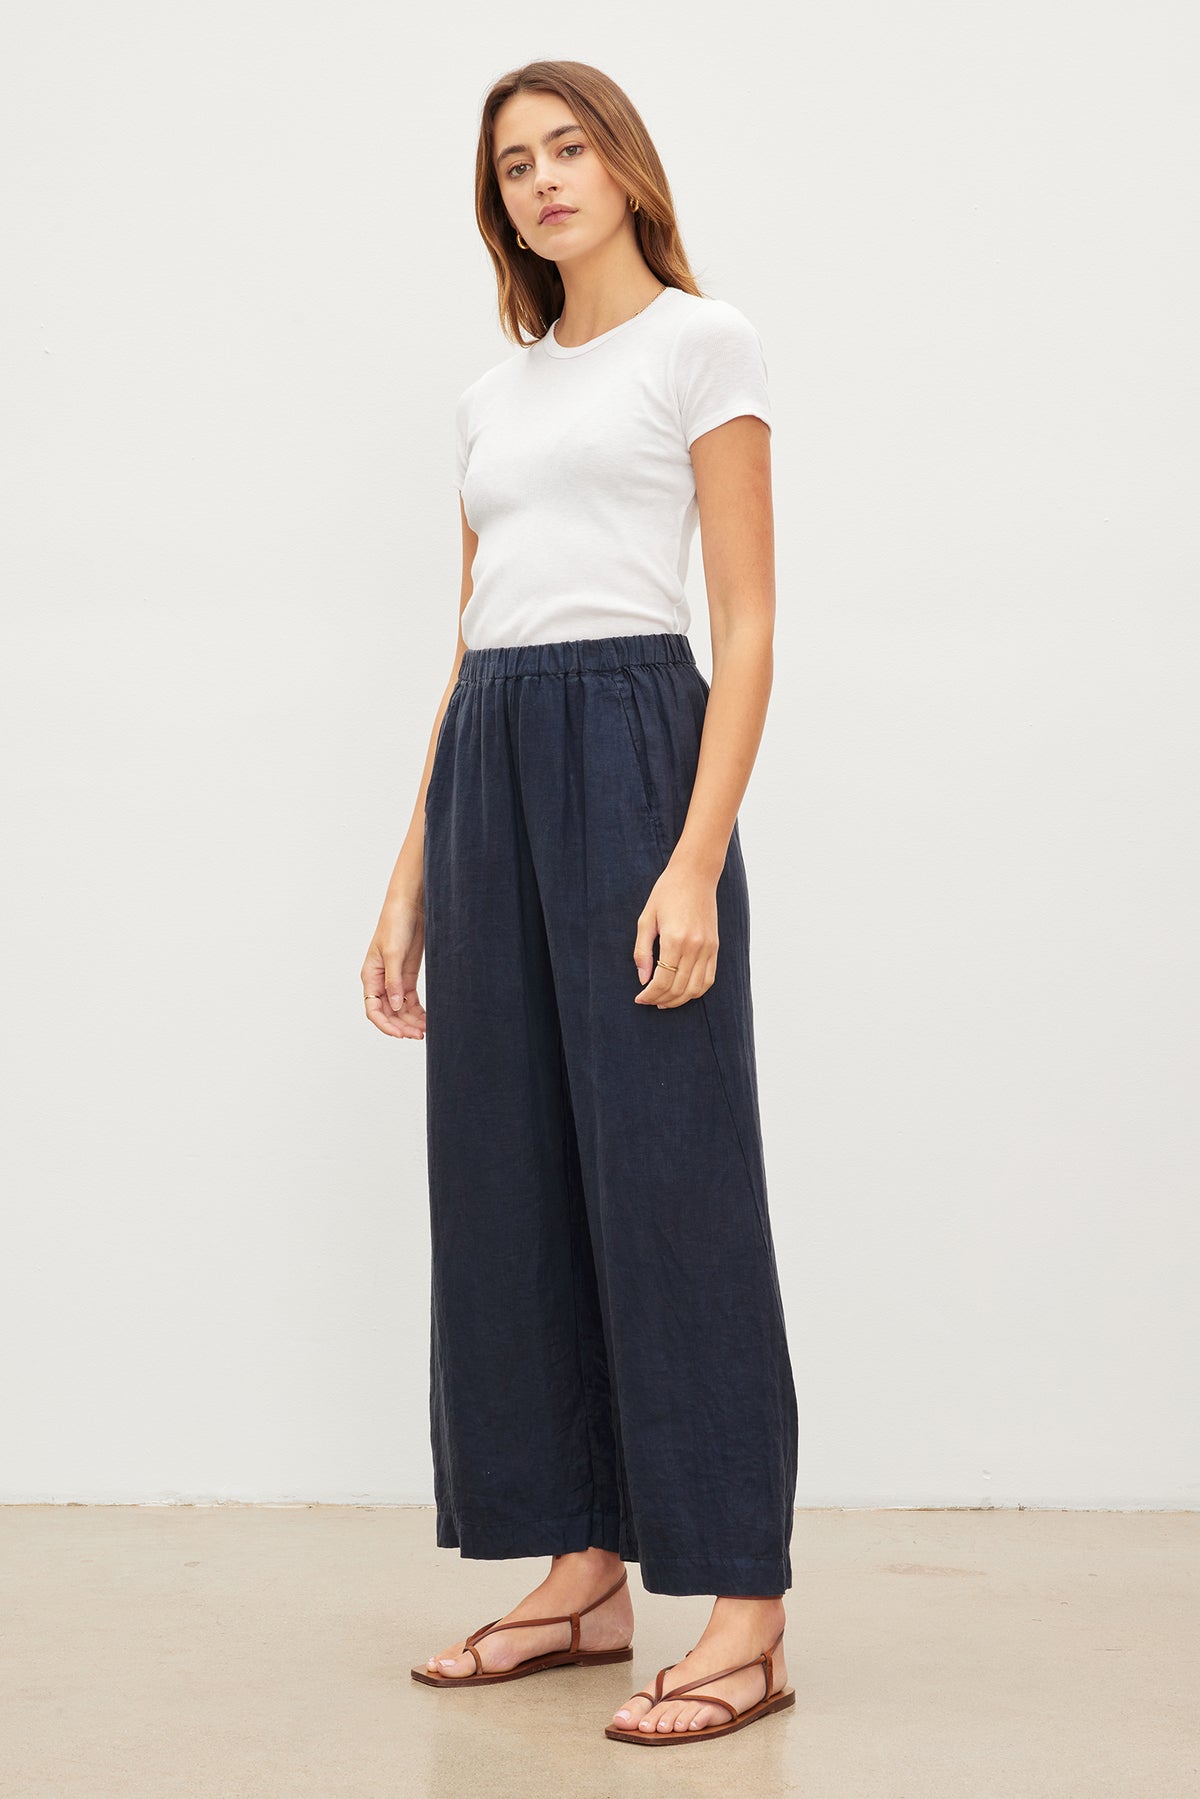 Woman standing in a studio, wearing a white t-shirt and Velvet by Graham & Spencer LOLA LINEN PANT with an elastic waist and tan sandals.-36581077450945